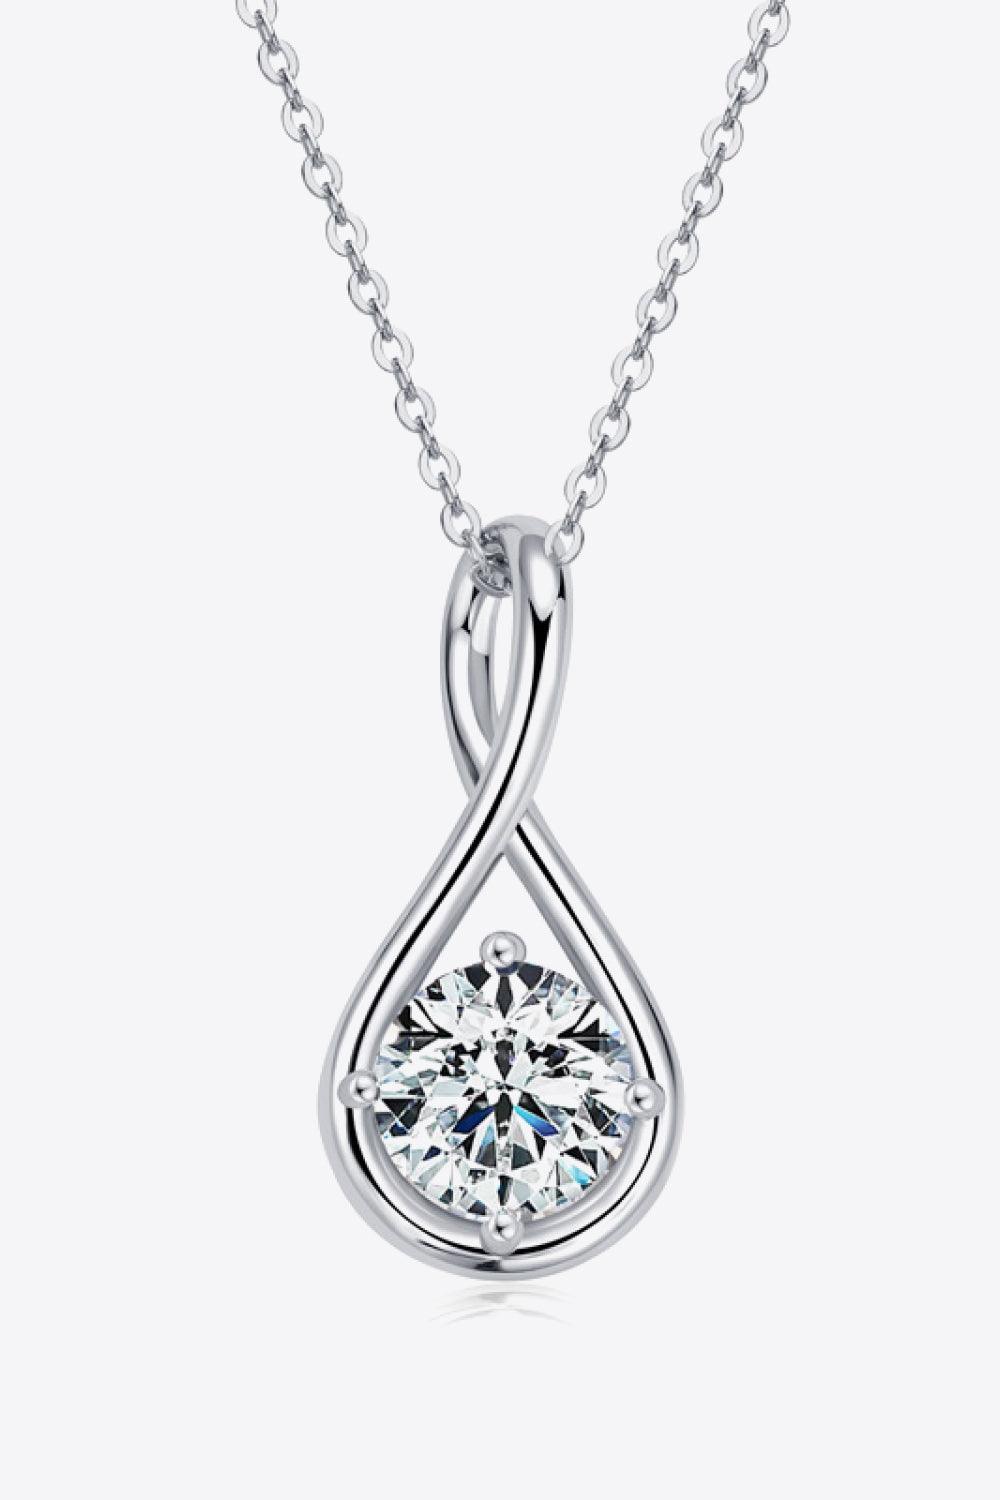 2 Carat Moissanite 925 Sterling Silver Necklace - Lab Fashion, Home & Health